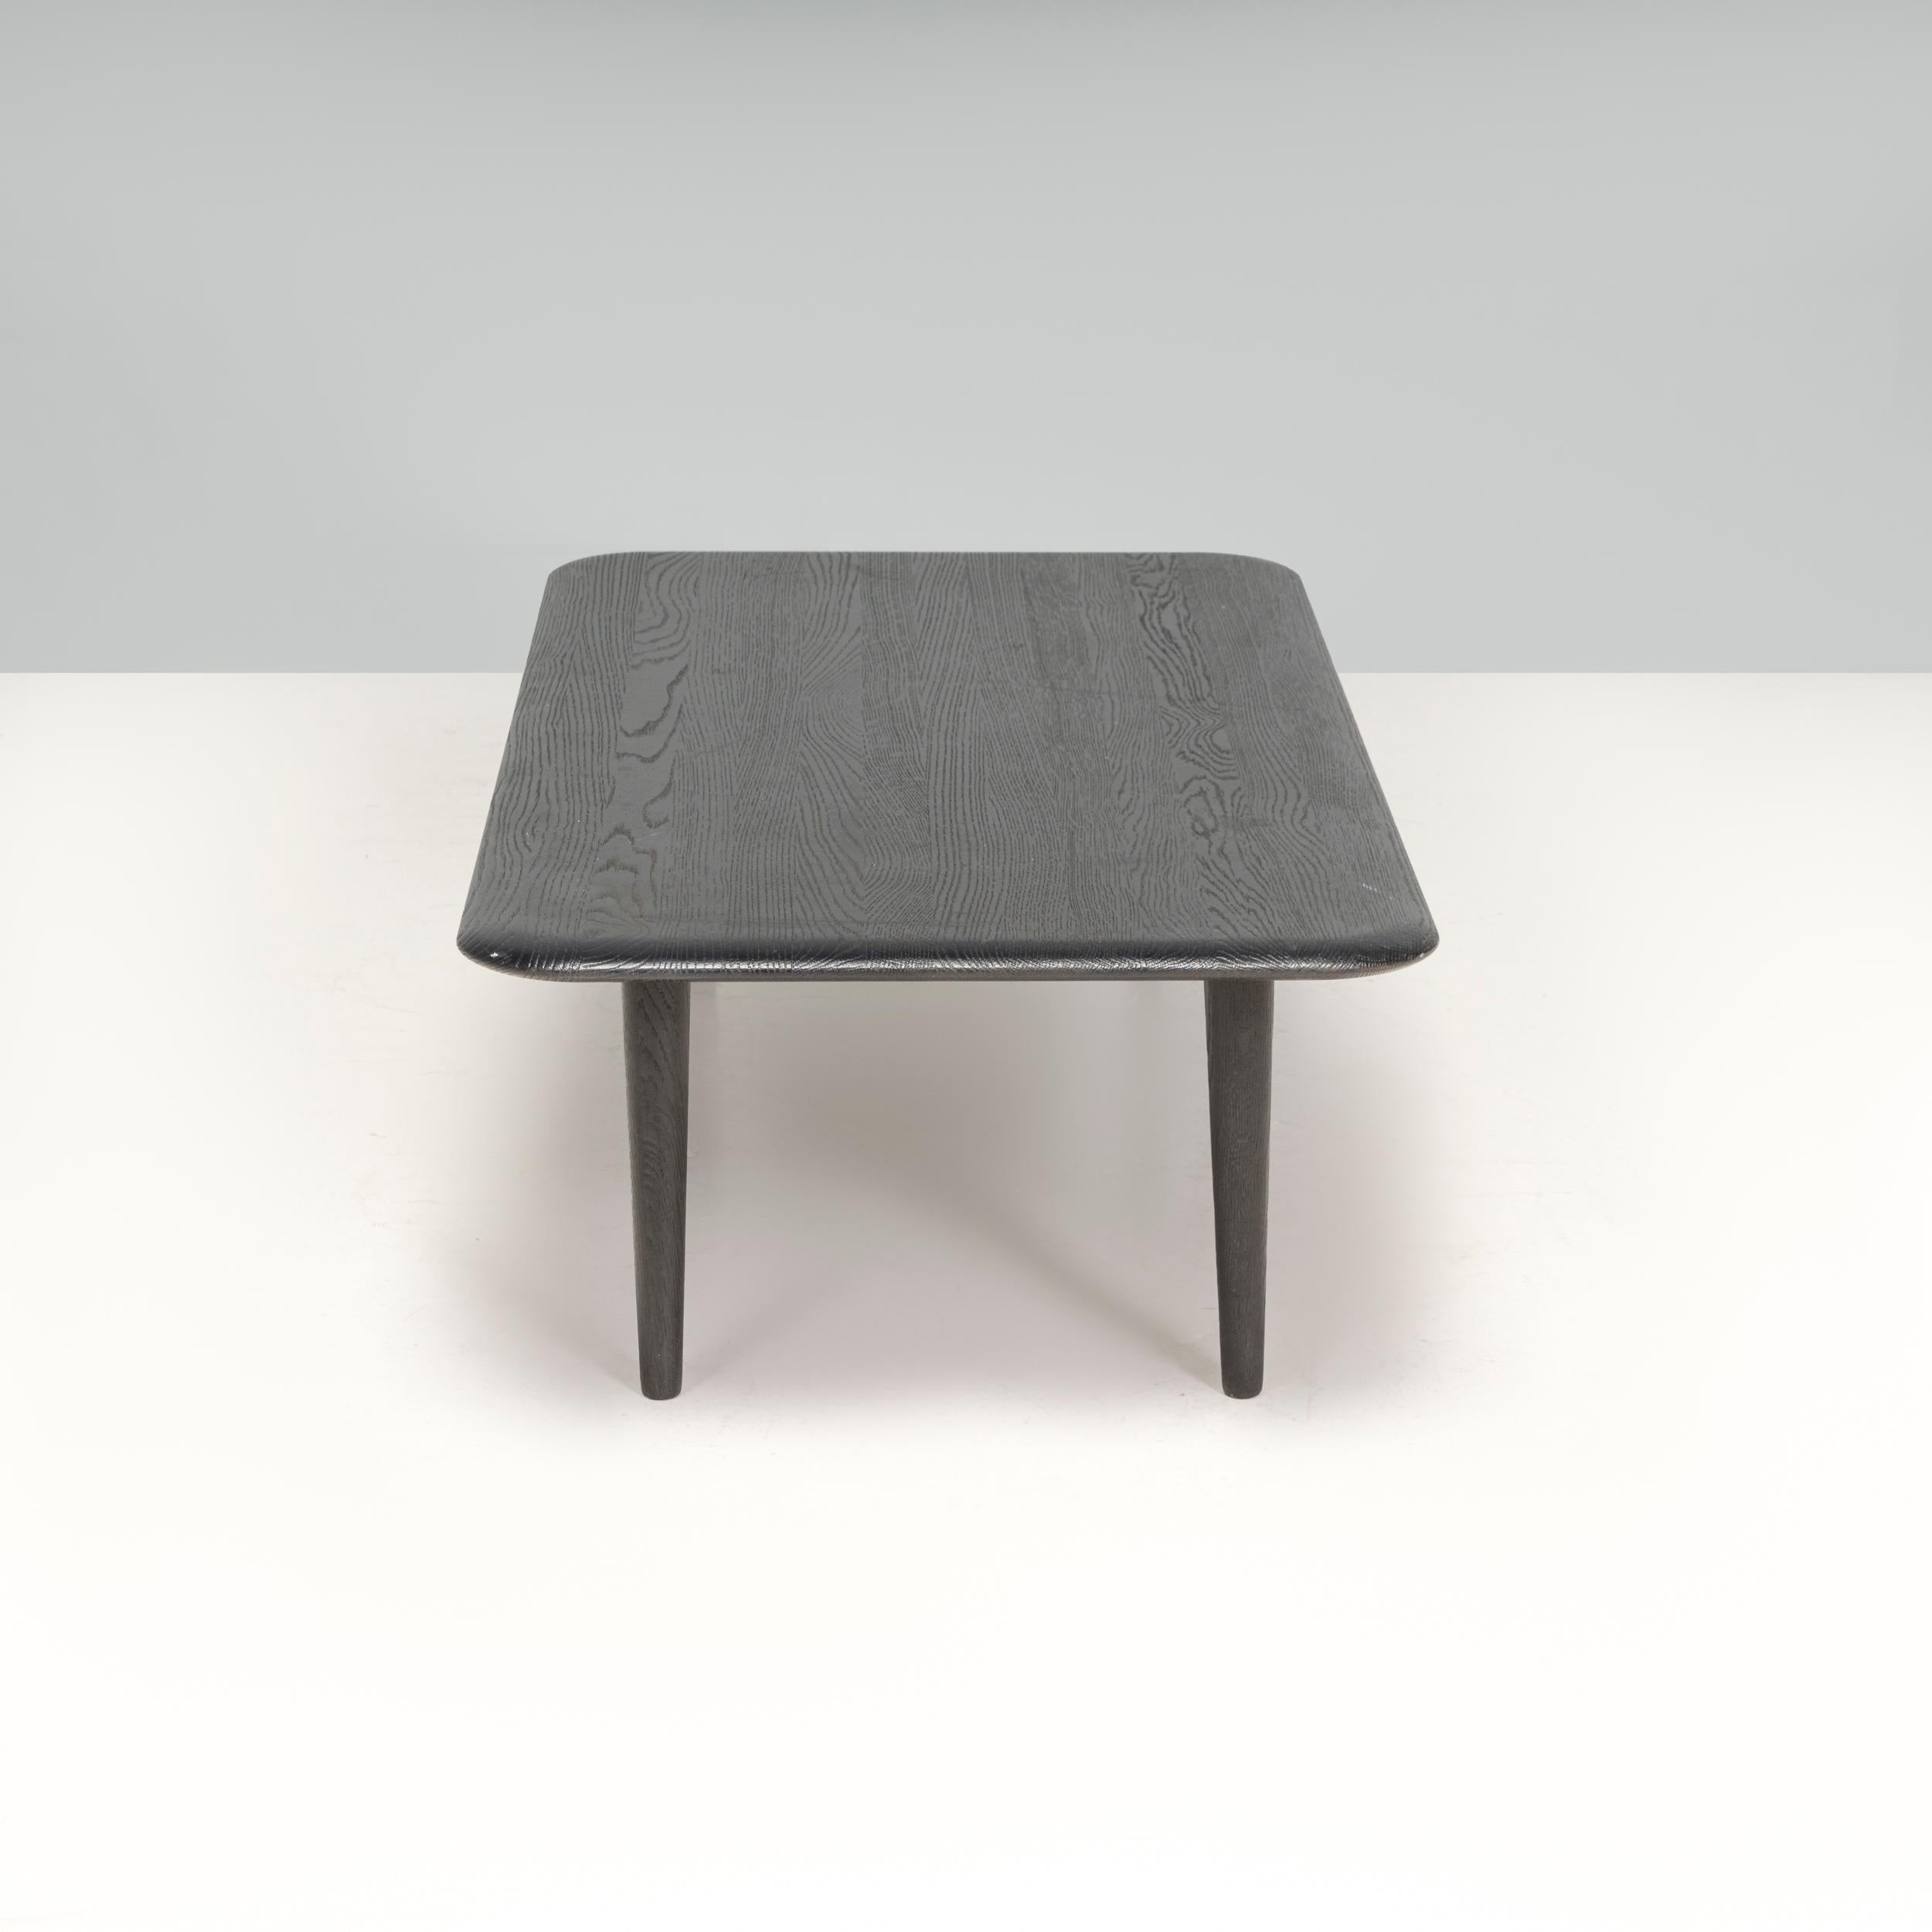 Designed by Tom Dixon, one of the best known British designers of the 21st century, this low dark oak slab table combines quality materials with a sleek aesthetic.

 Constructed from solid crowned oak, the wood has been deeply brushed and lacquered